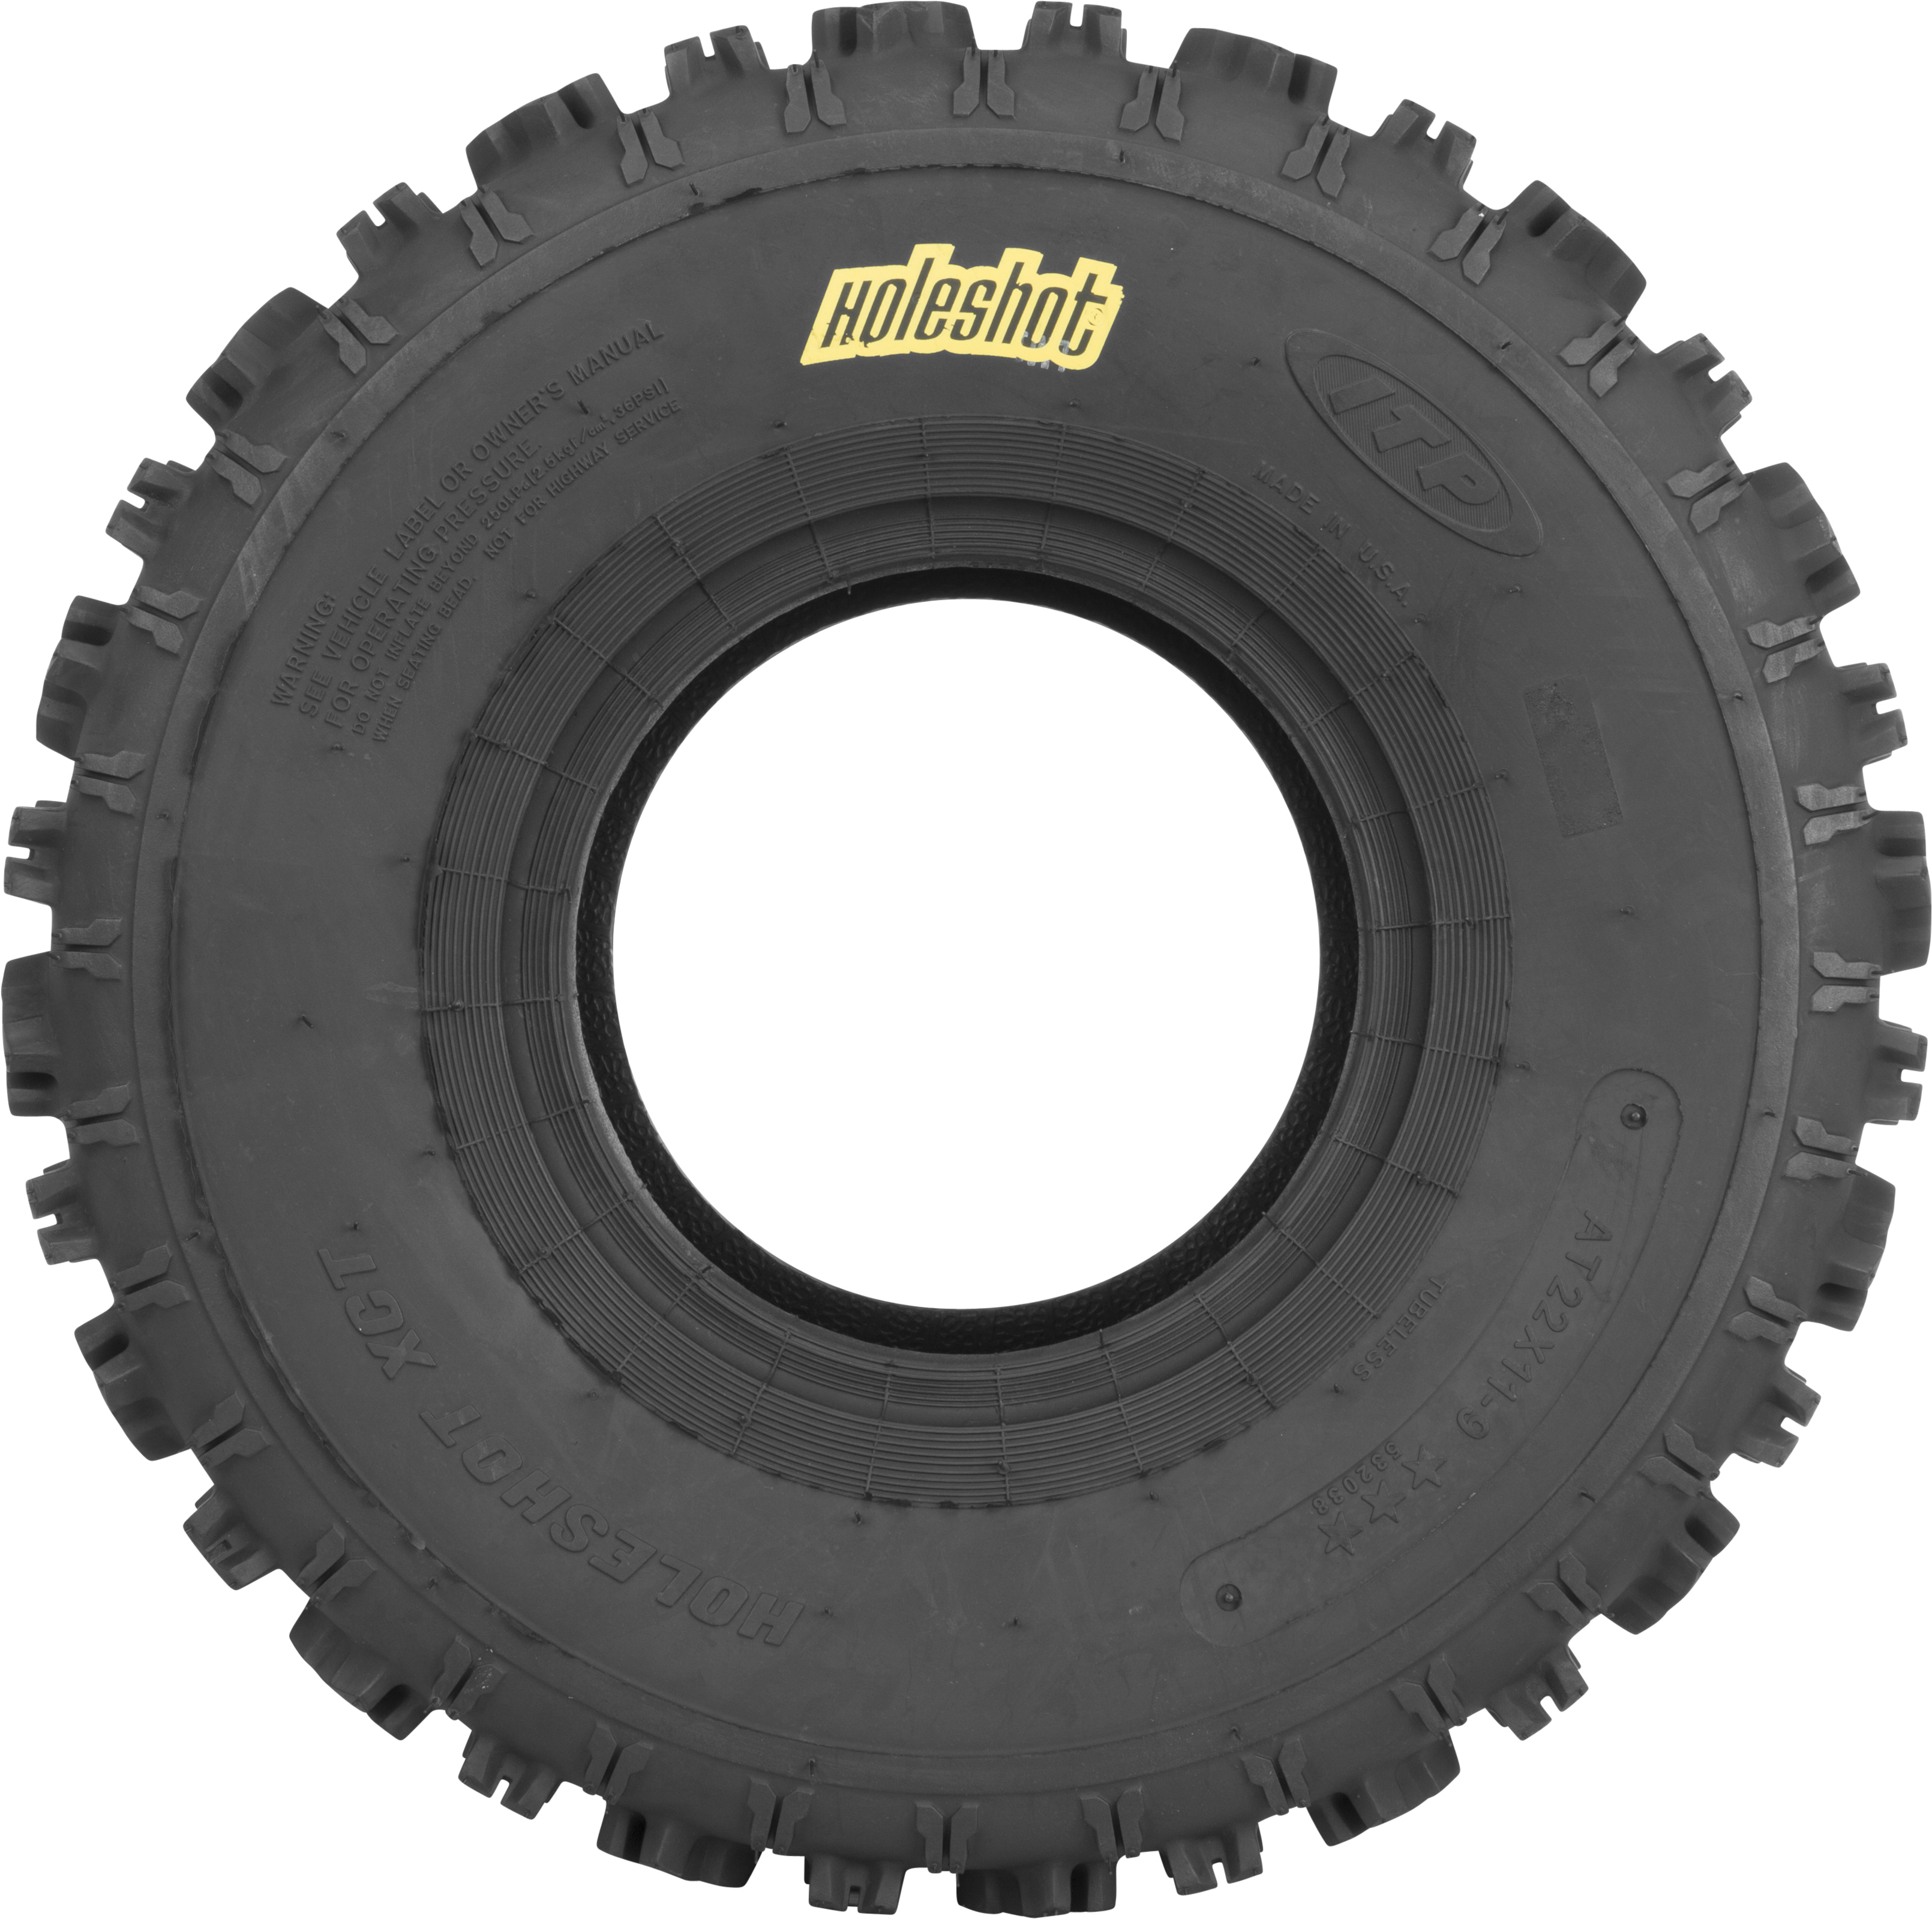 20x11-8 Holeshot Rear ATV Tire, 4 Ply Rated - Click Image to Close